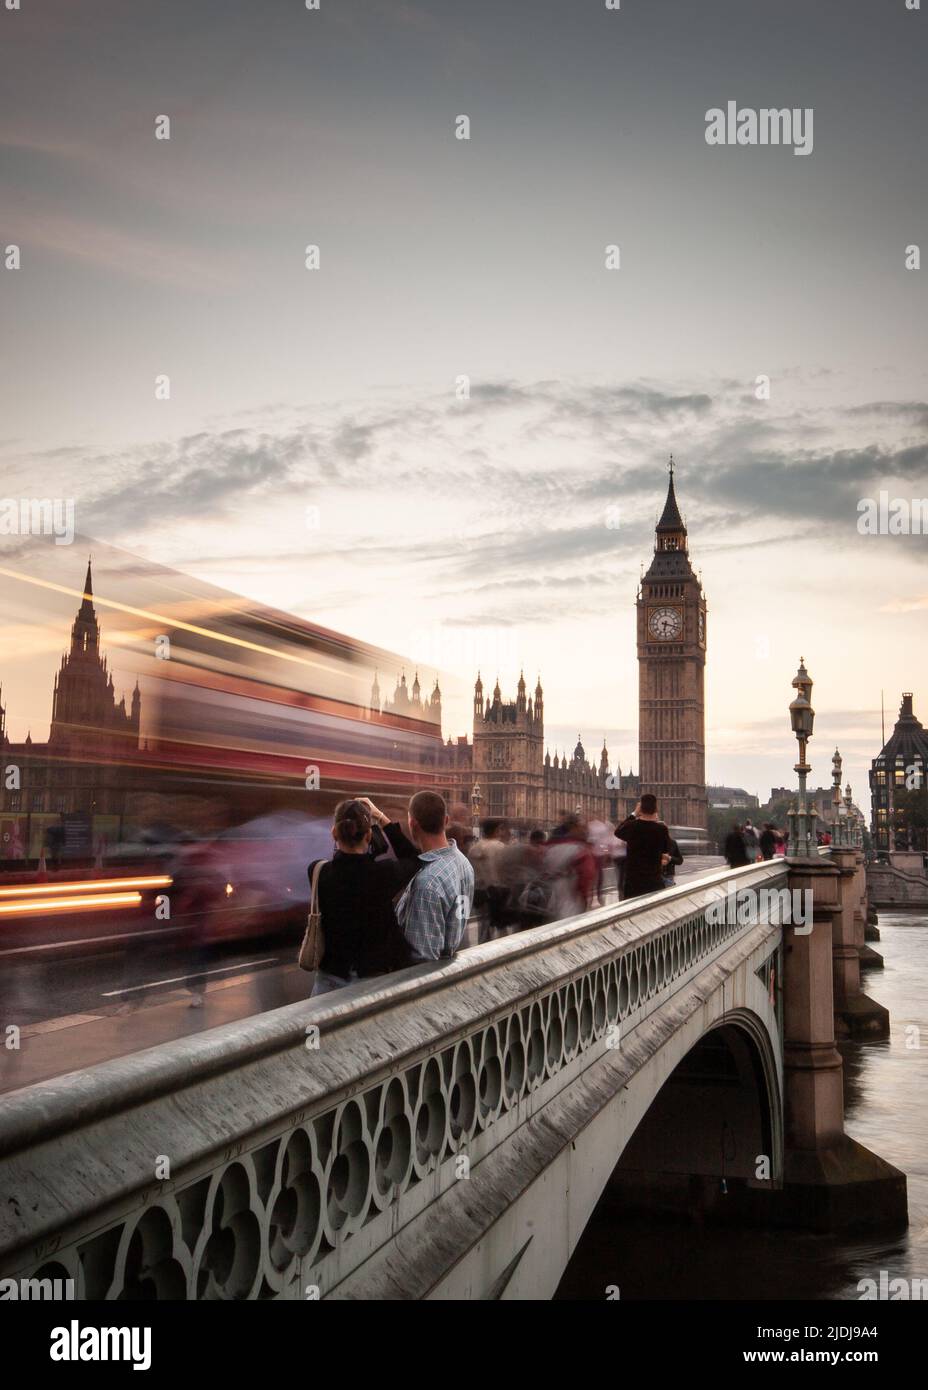 London City Break. Tourists taking a moment to capture a view of Westminster Bridge and London's famous Big Ben landmark clock tower. Stock Photo